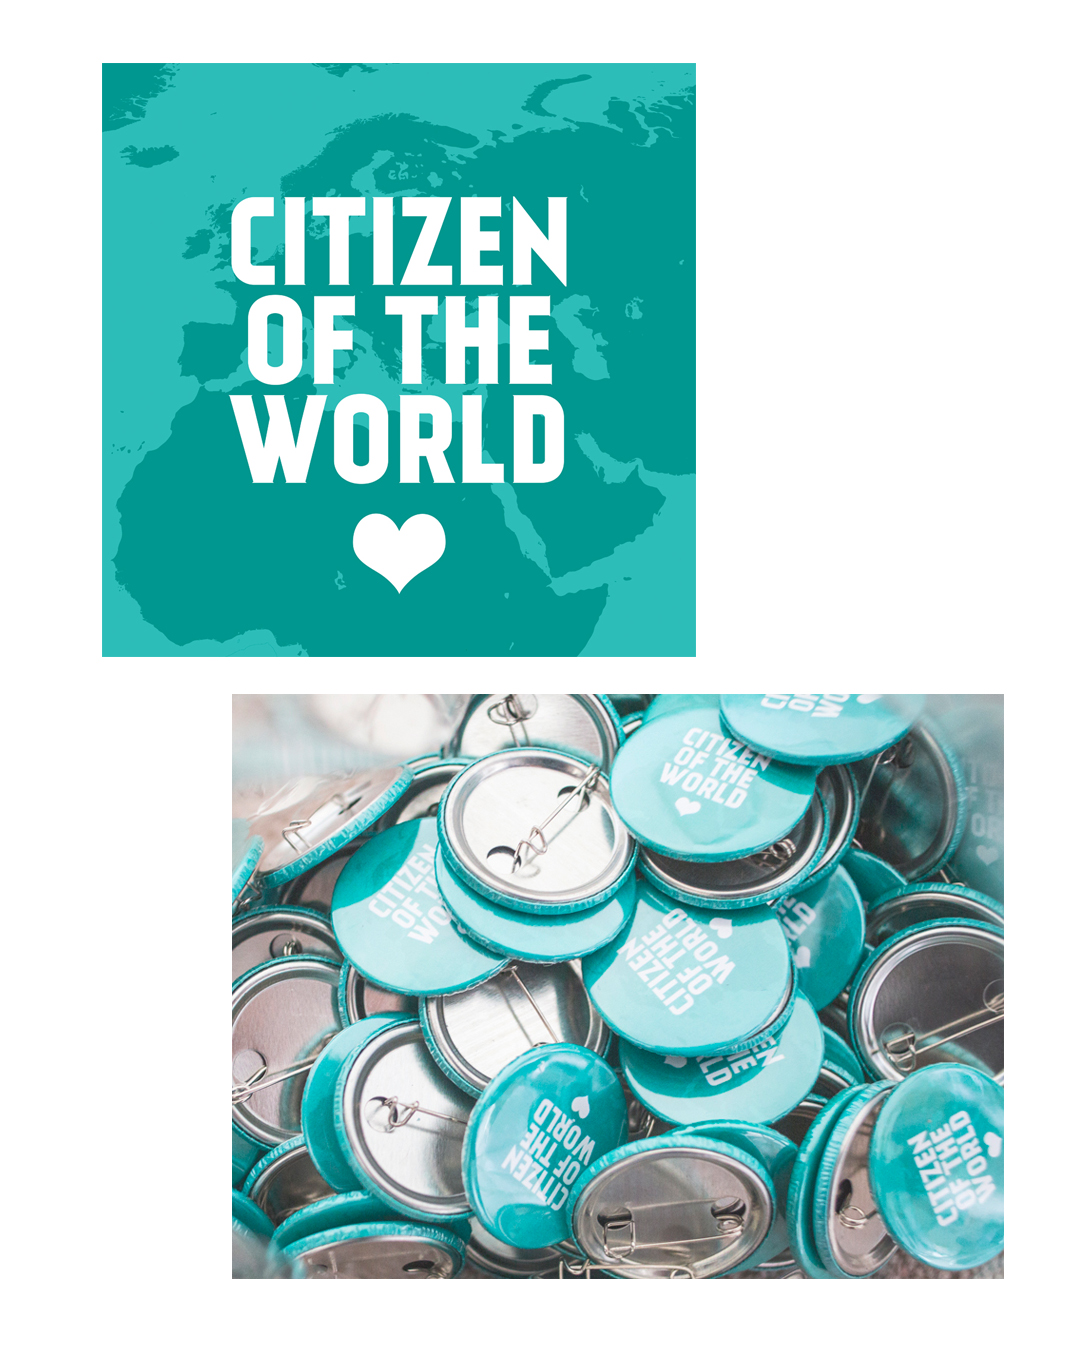 citizen of the world badge